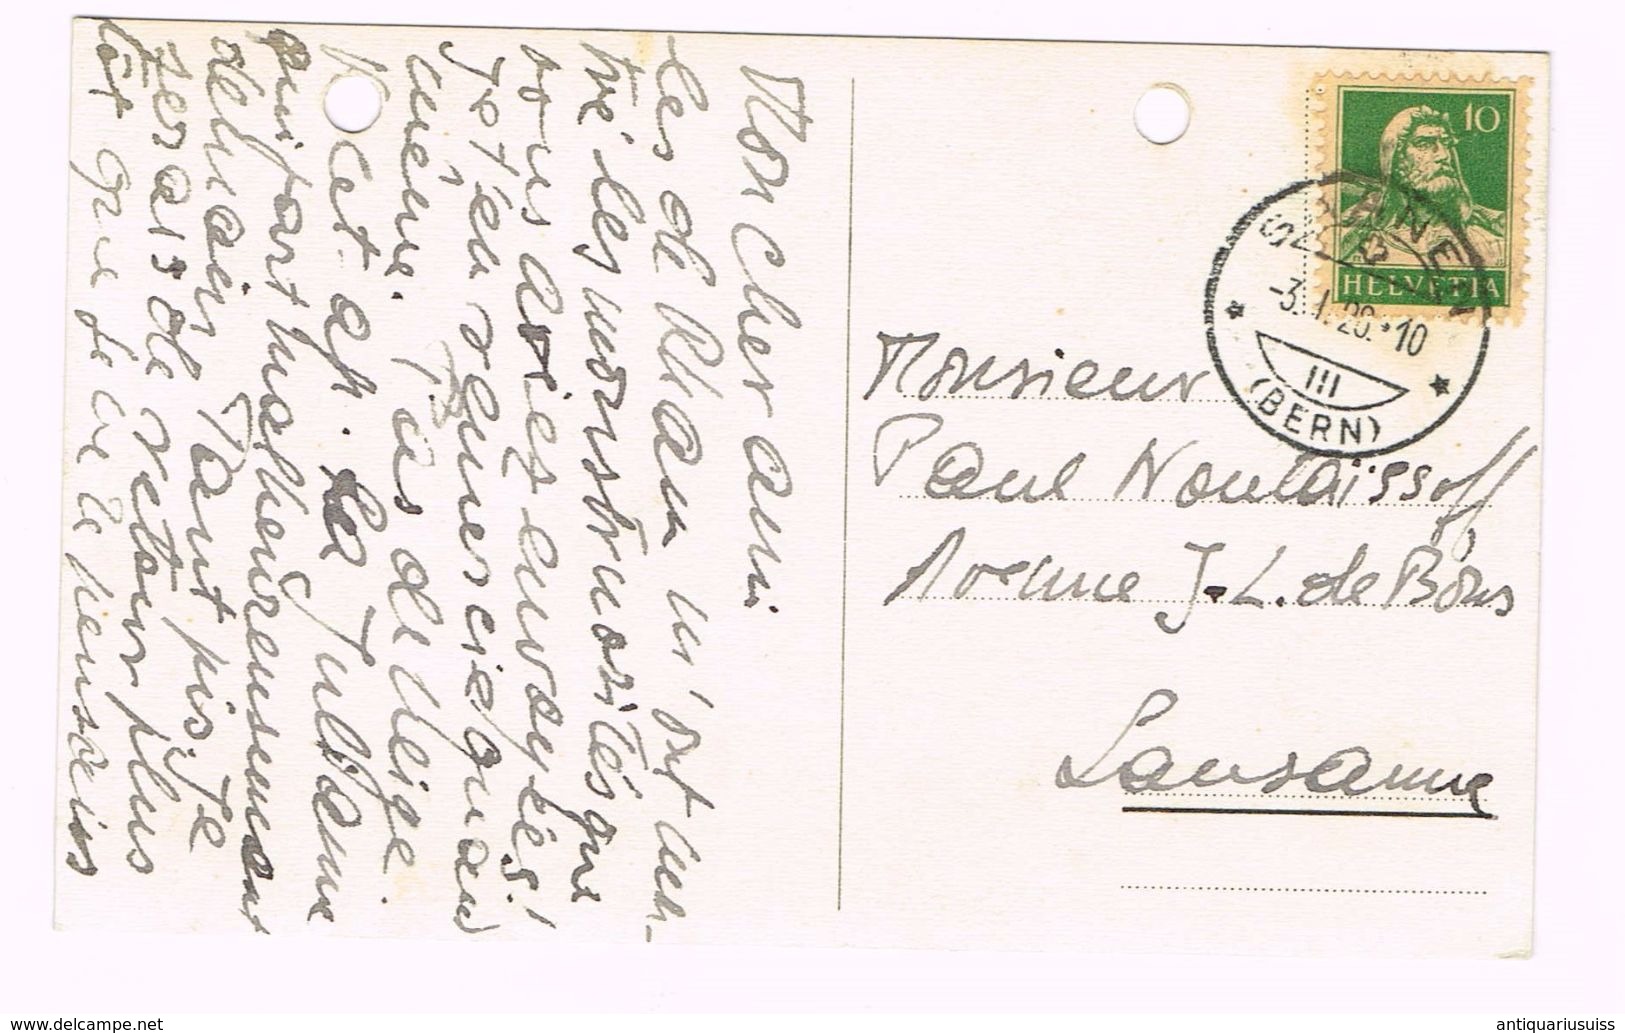 GSTAAD An The Montreux-Bernese Oberland Railway - "NEVADA" - Luge Run - 1920 - Berne